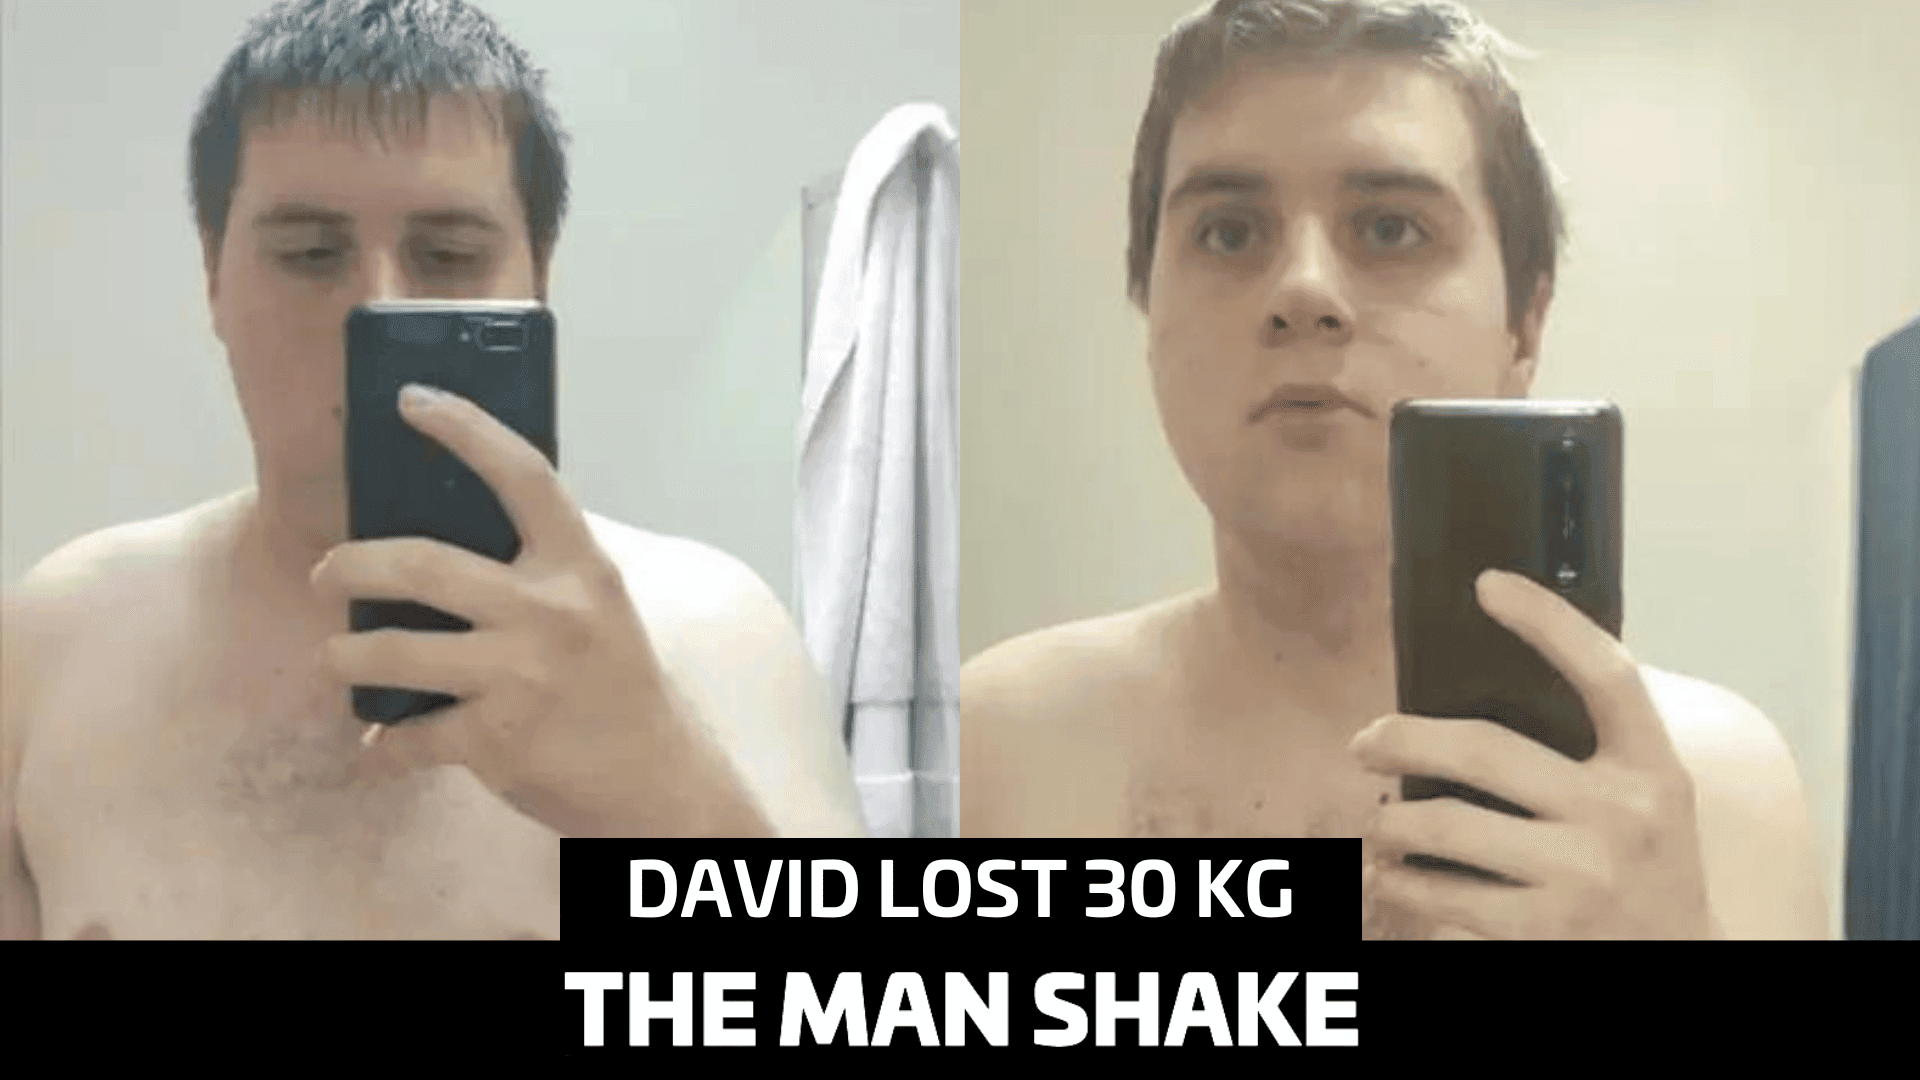 David got sick of the teasing and lost 30kg